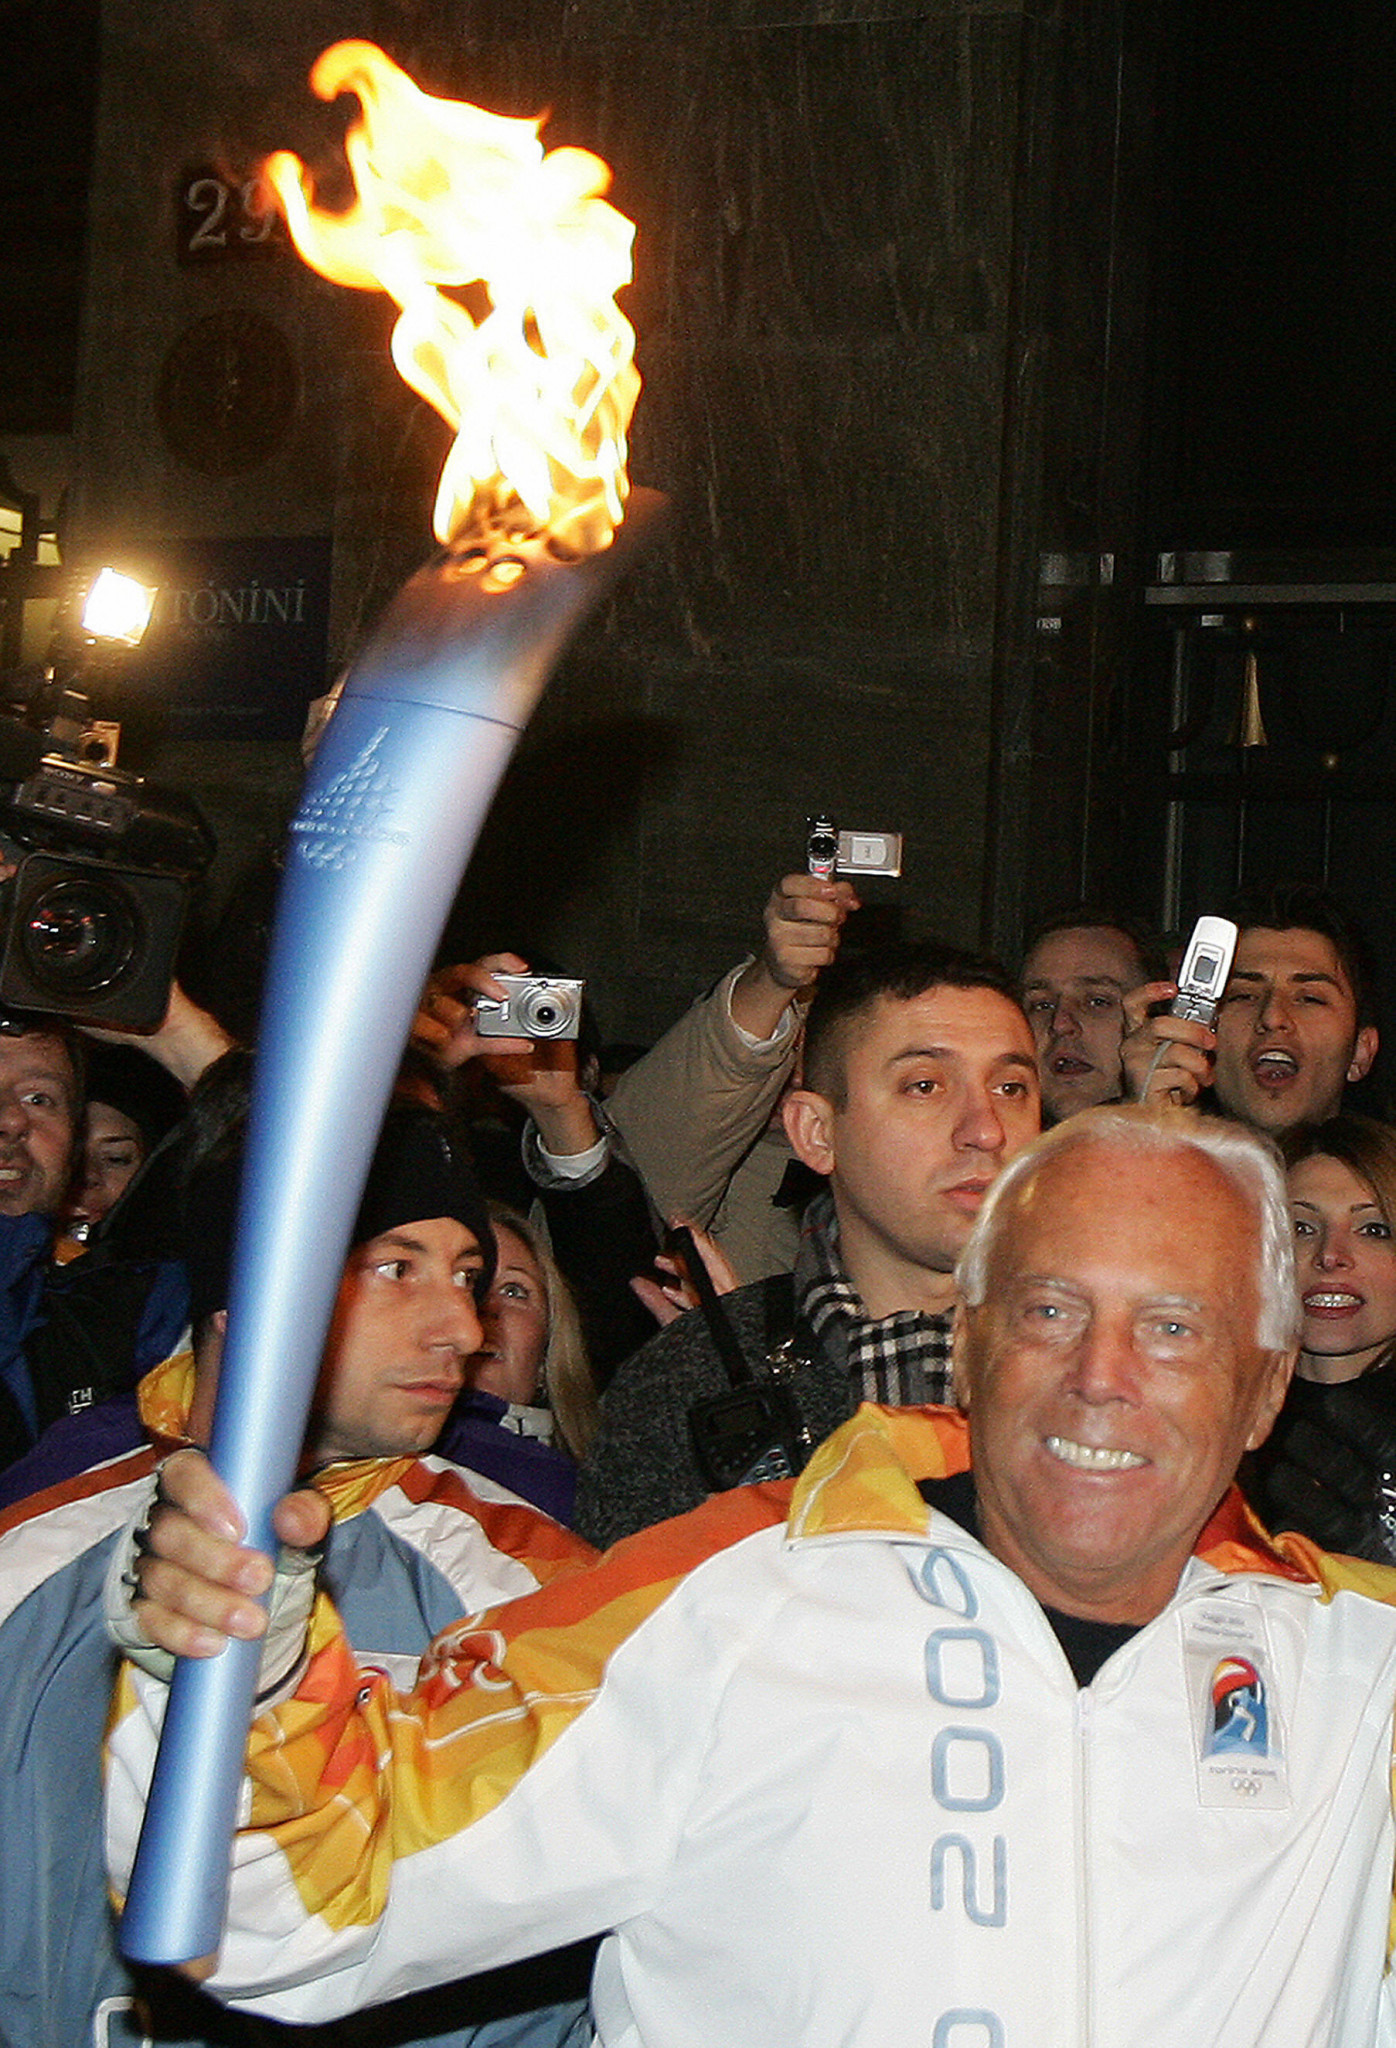 Giorgio Armani carried the Olympic Flame in 2006, the last time Italy held the Winter Olympics ©Getty Images